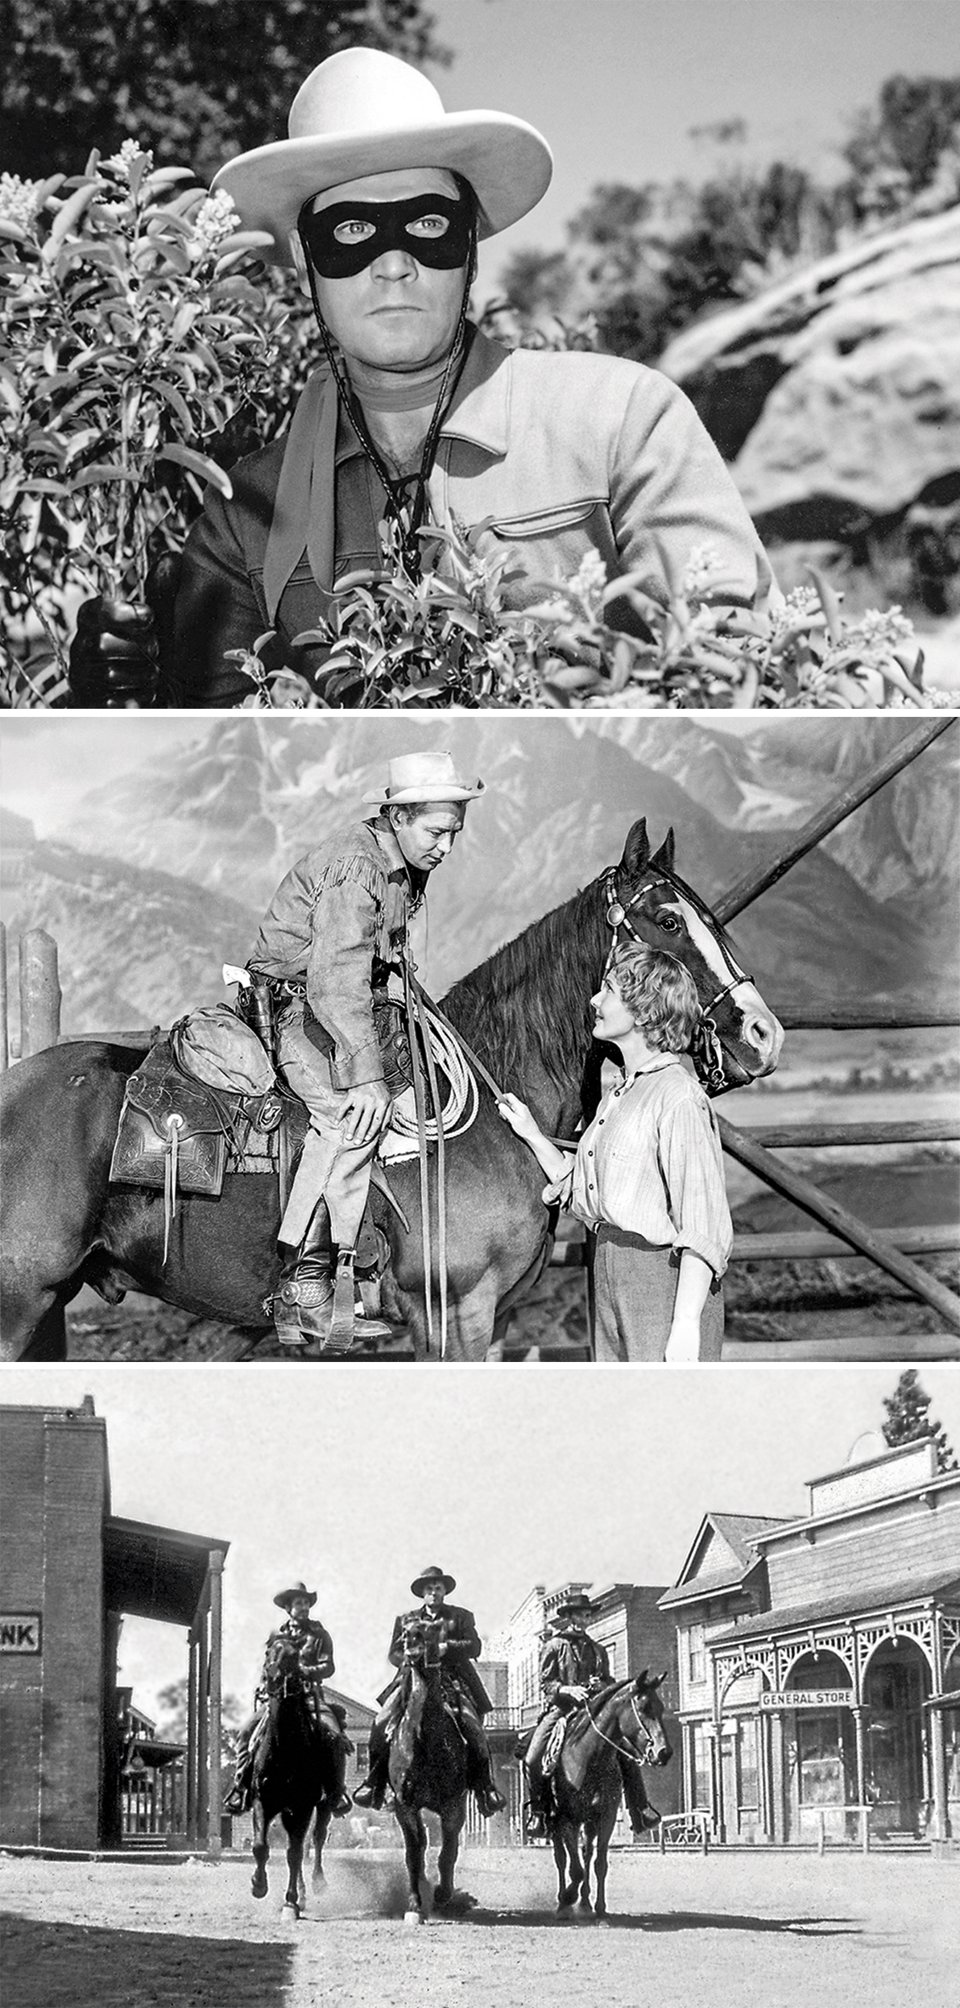 3 black and white photos: the Lone Ranger in a black face mask; a man on a horse bending to talk to a woman standing beside him; three men riding horses into a Western town